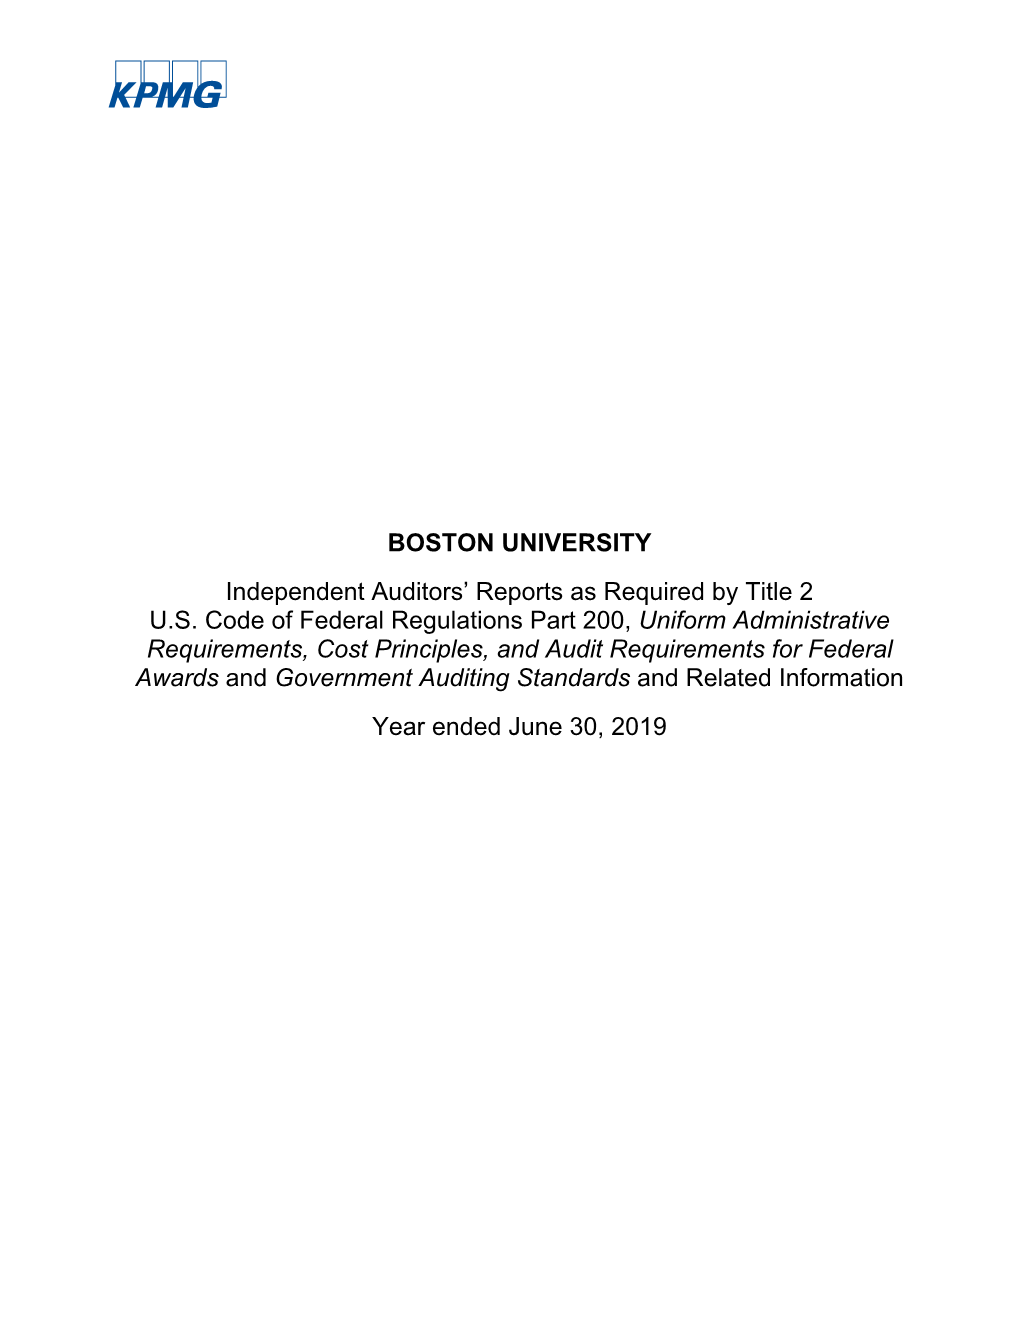 BOSTON UNIVERSITY Independent Auditors' Reports As Required By